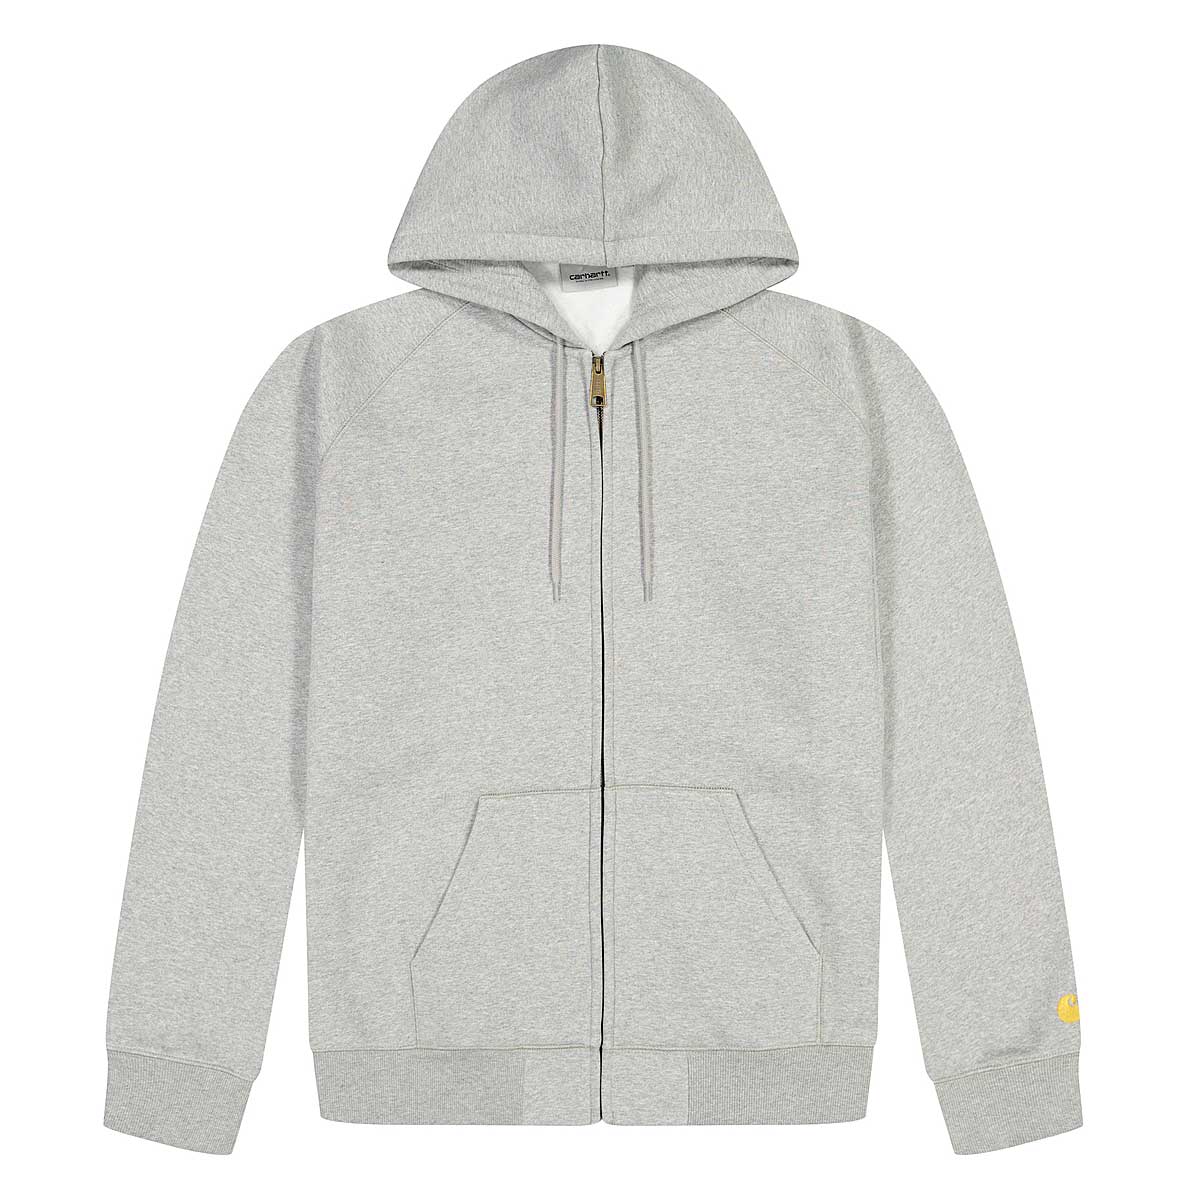 Carhartt Wip Hooded Chase Jacket, Grey Heather / Gold----